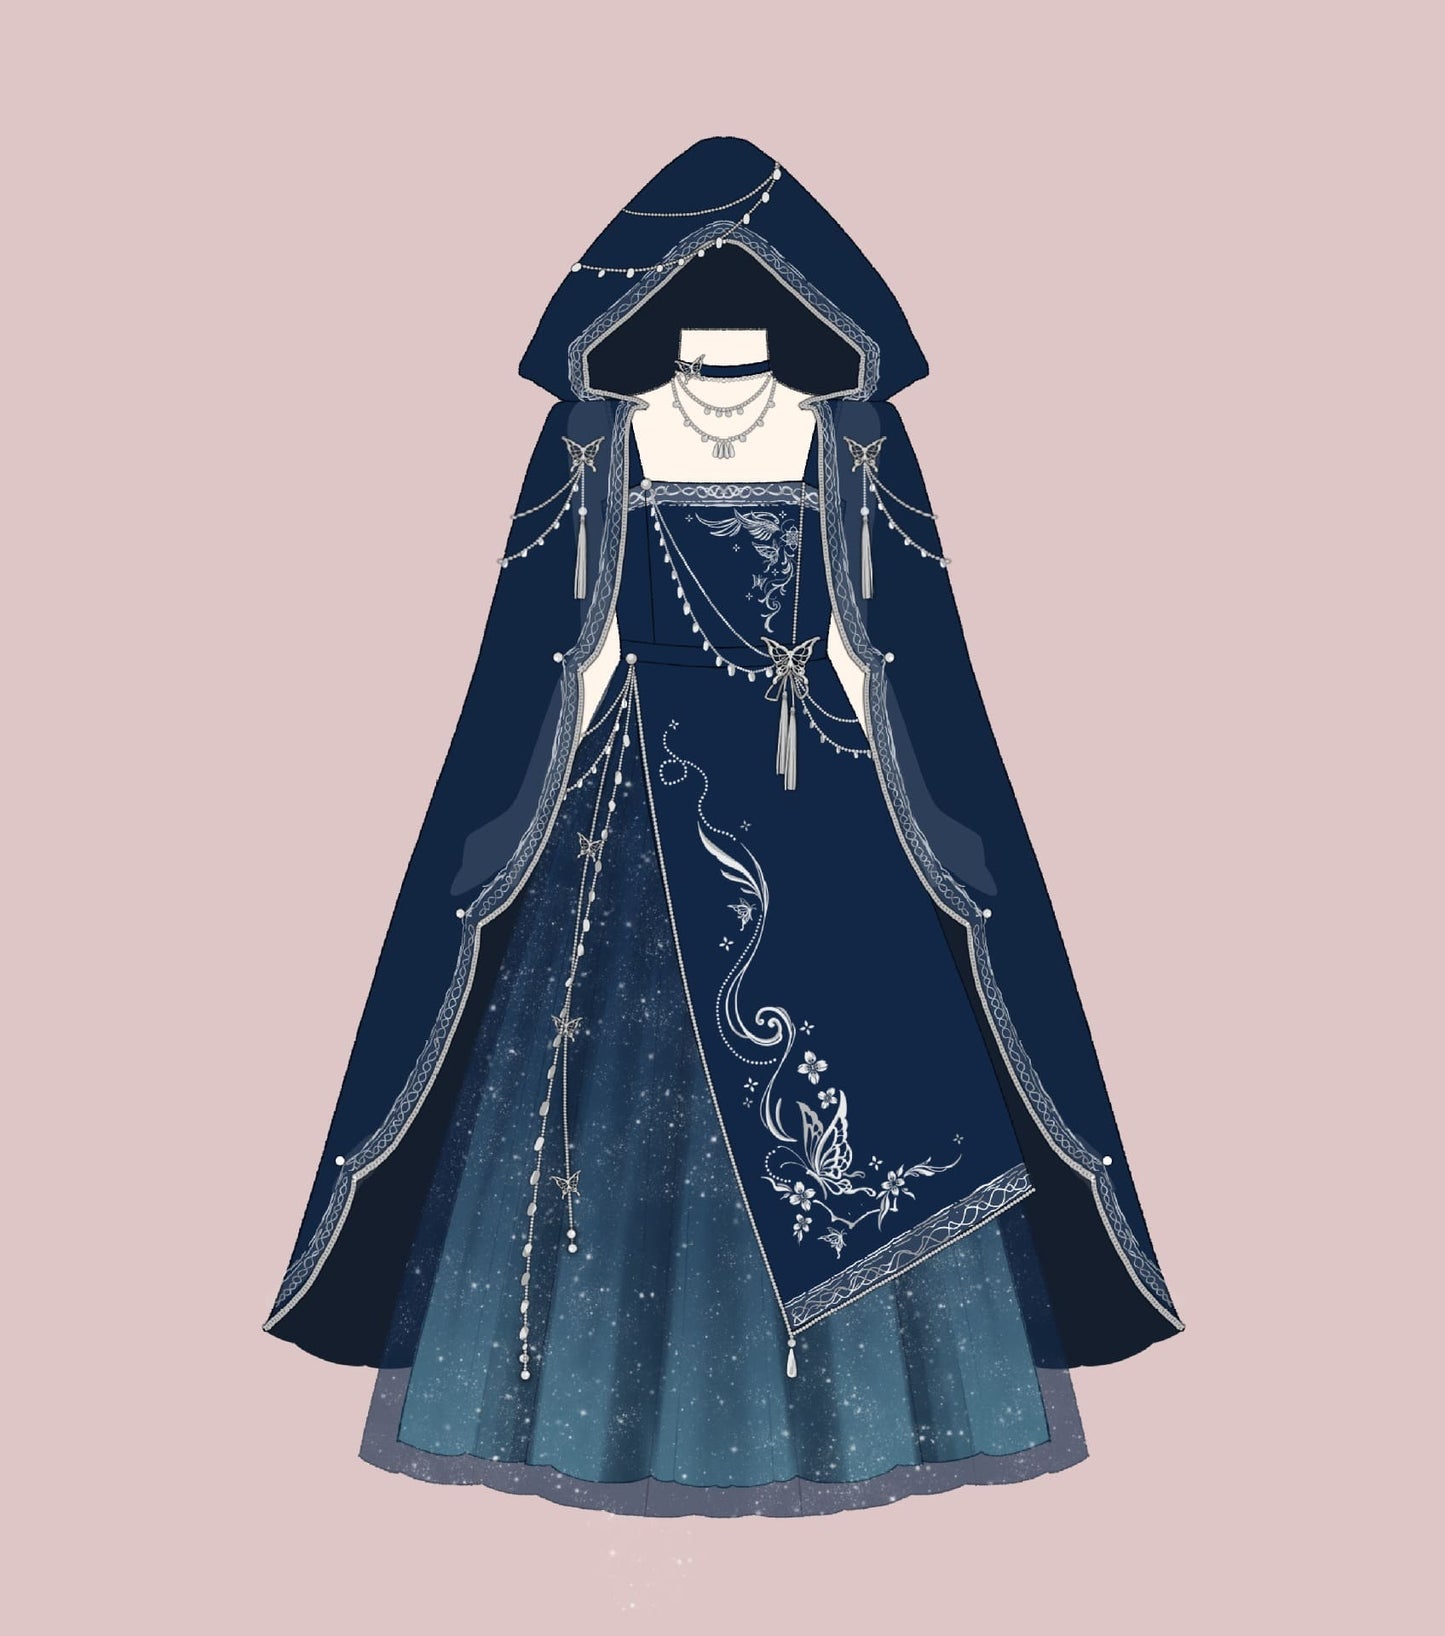 Ancient Hooded Cloak Embroidery Butterfly Tassel Chain Dress